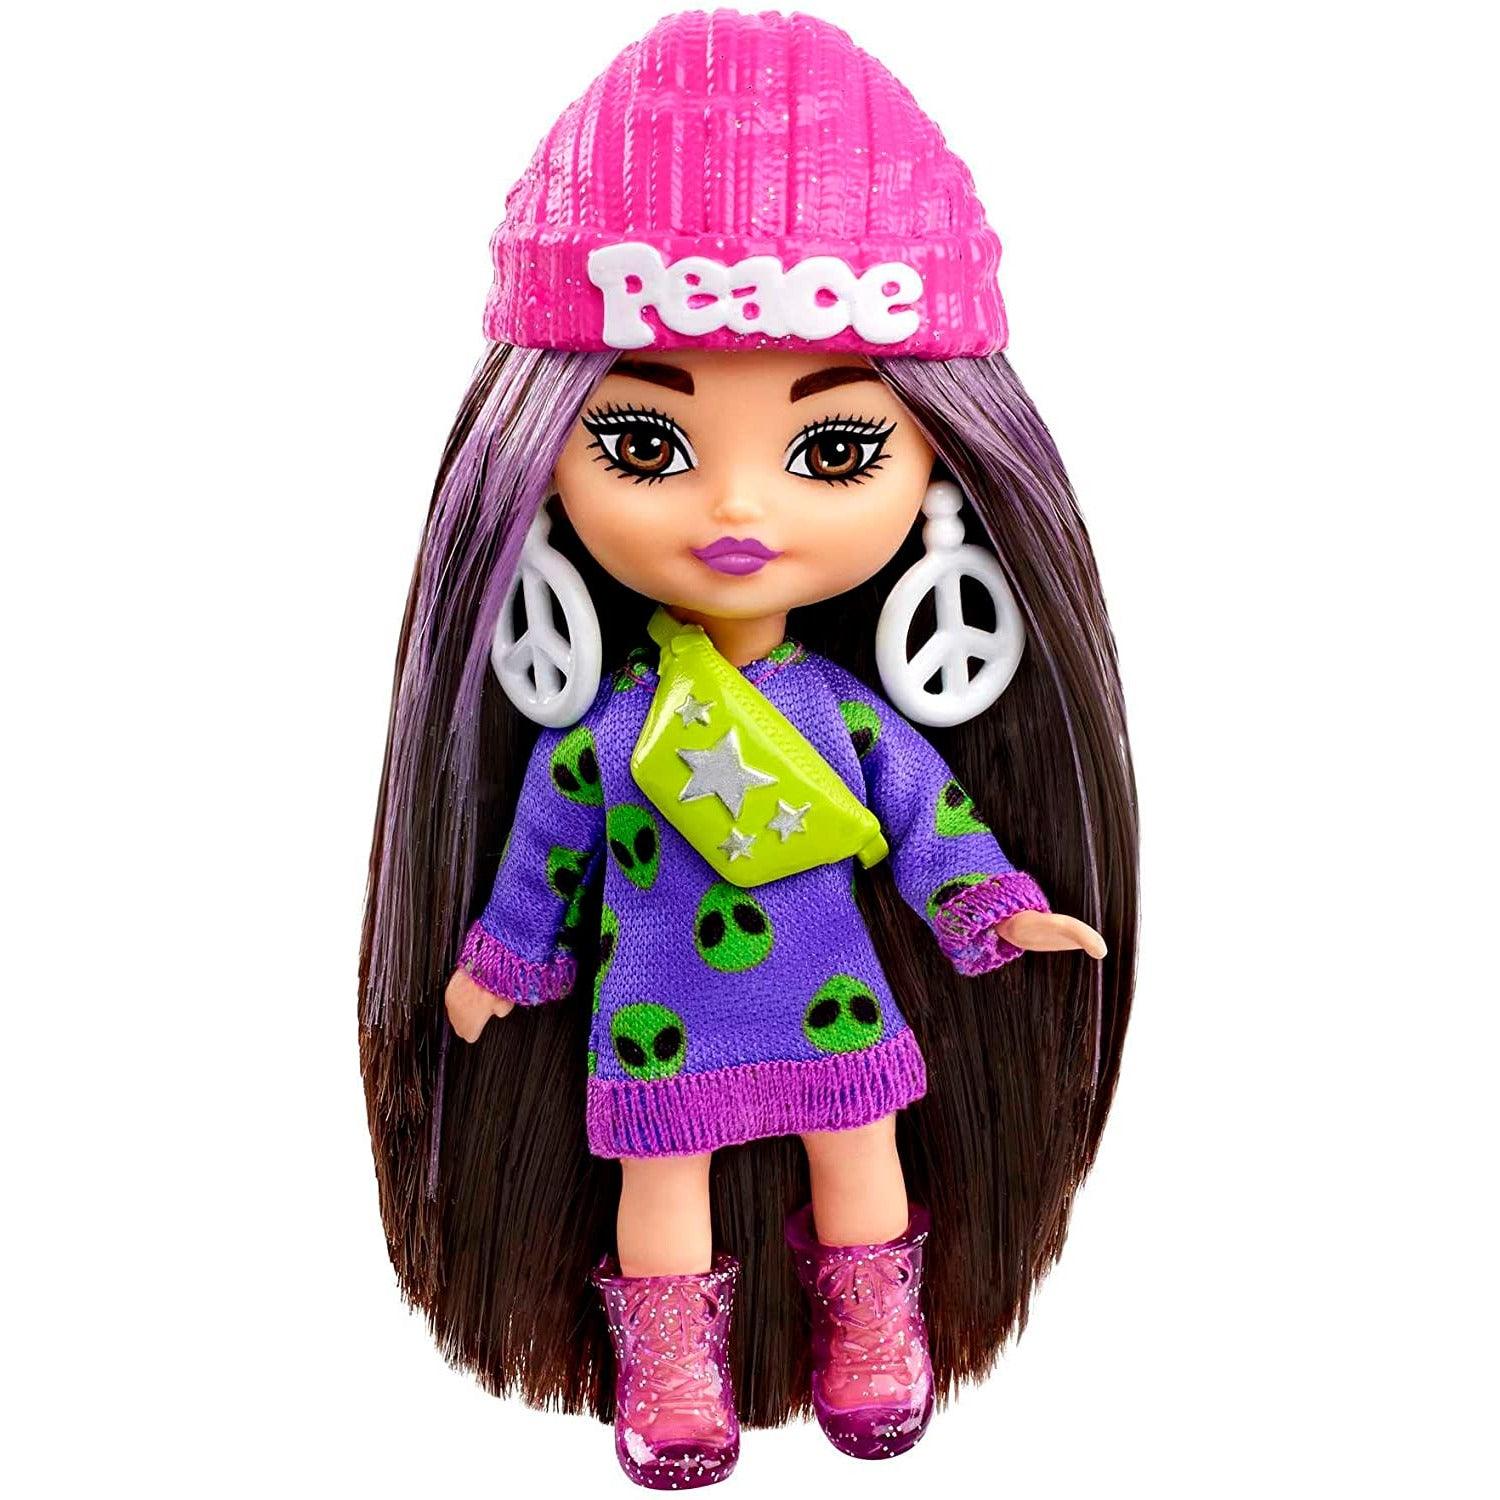 Barbie Extra Mini Minis Brunette Doll With Alien Sweater Dress, Peace Sign-Themed Clothes And Accessories